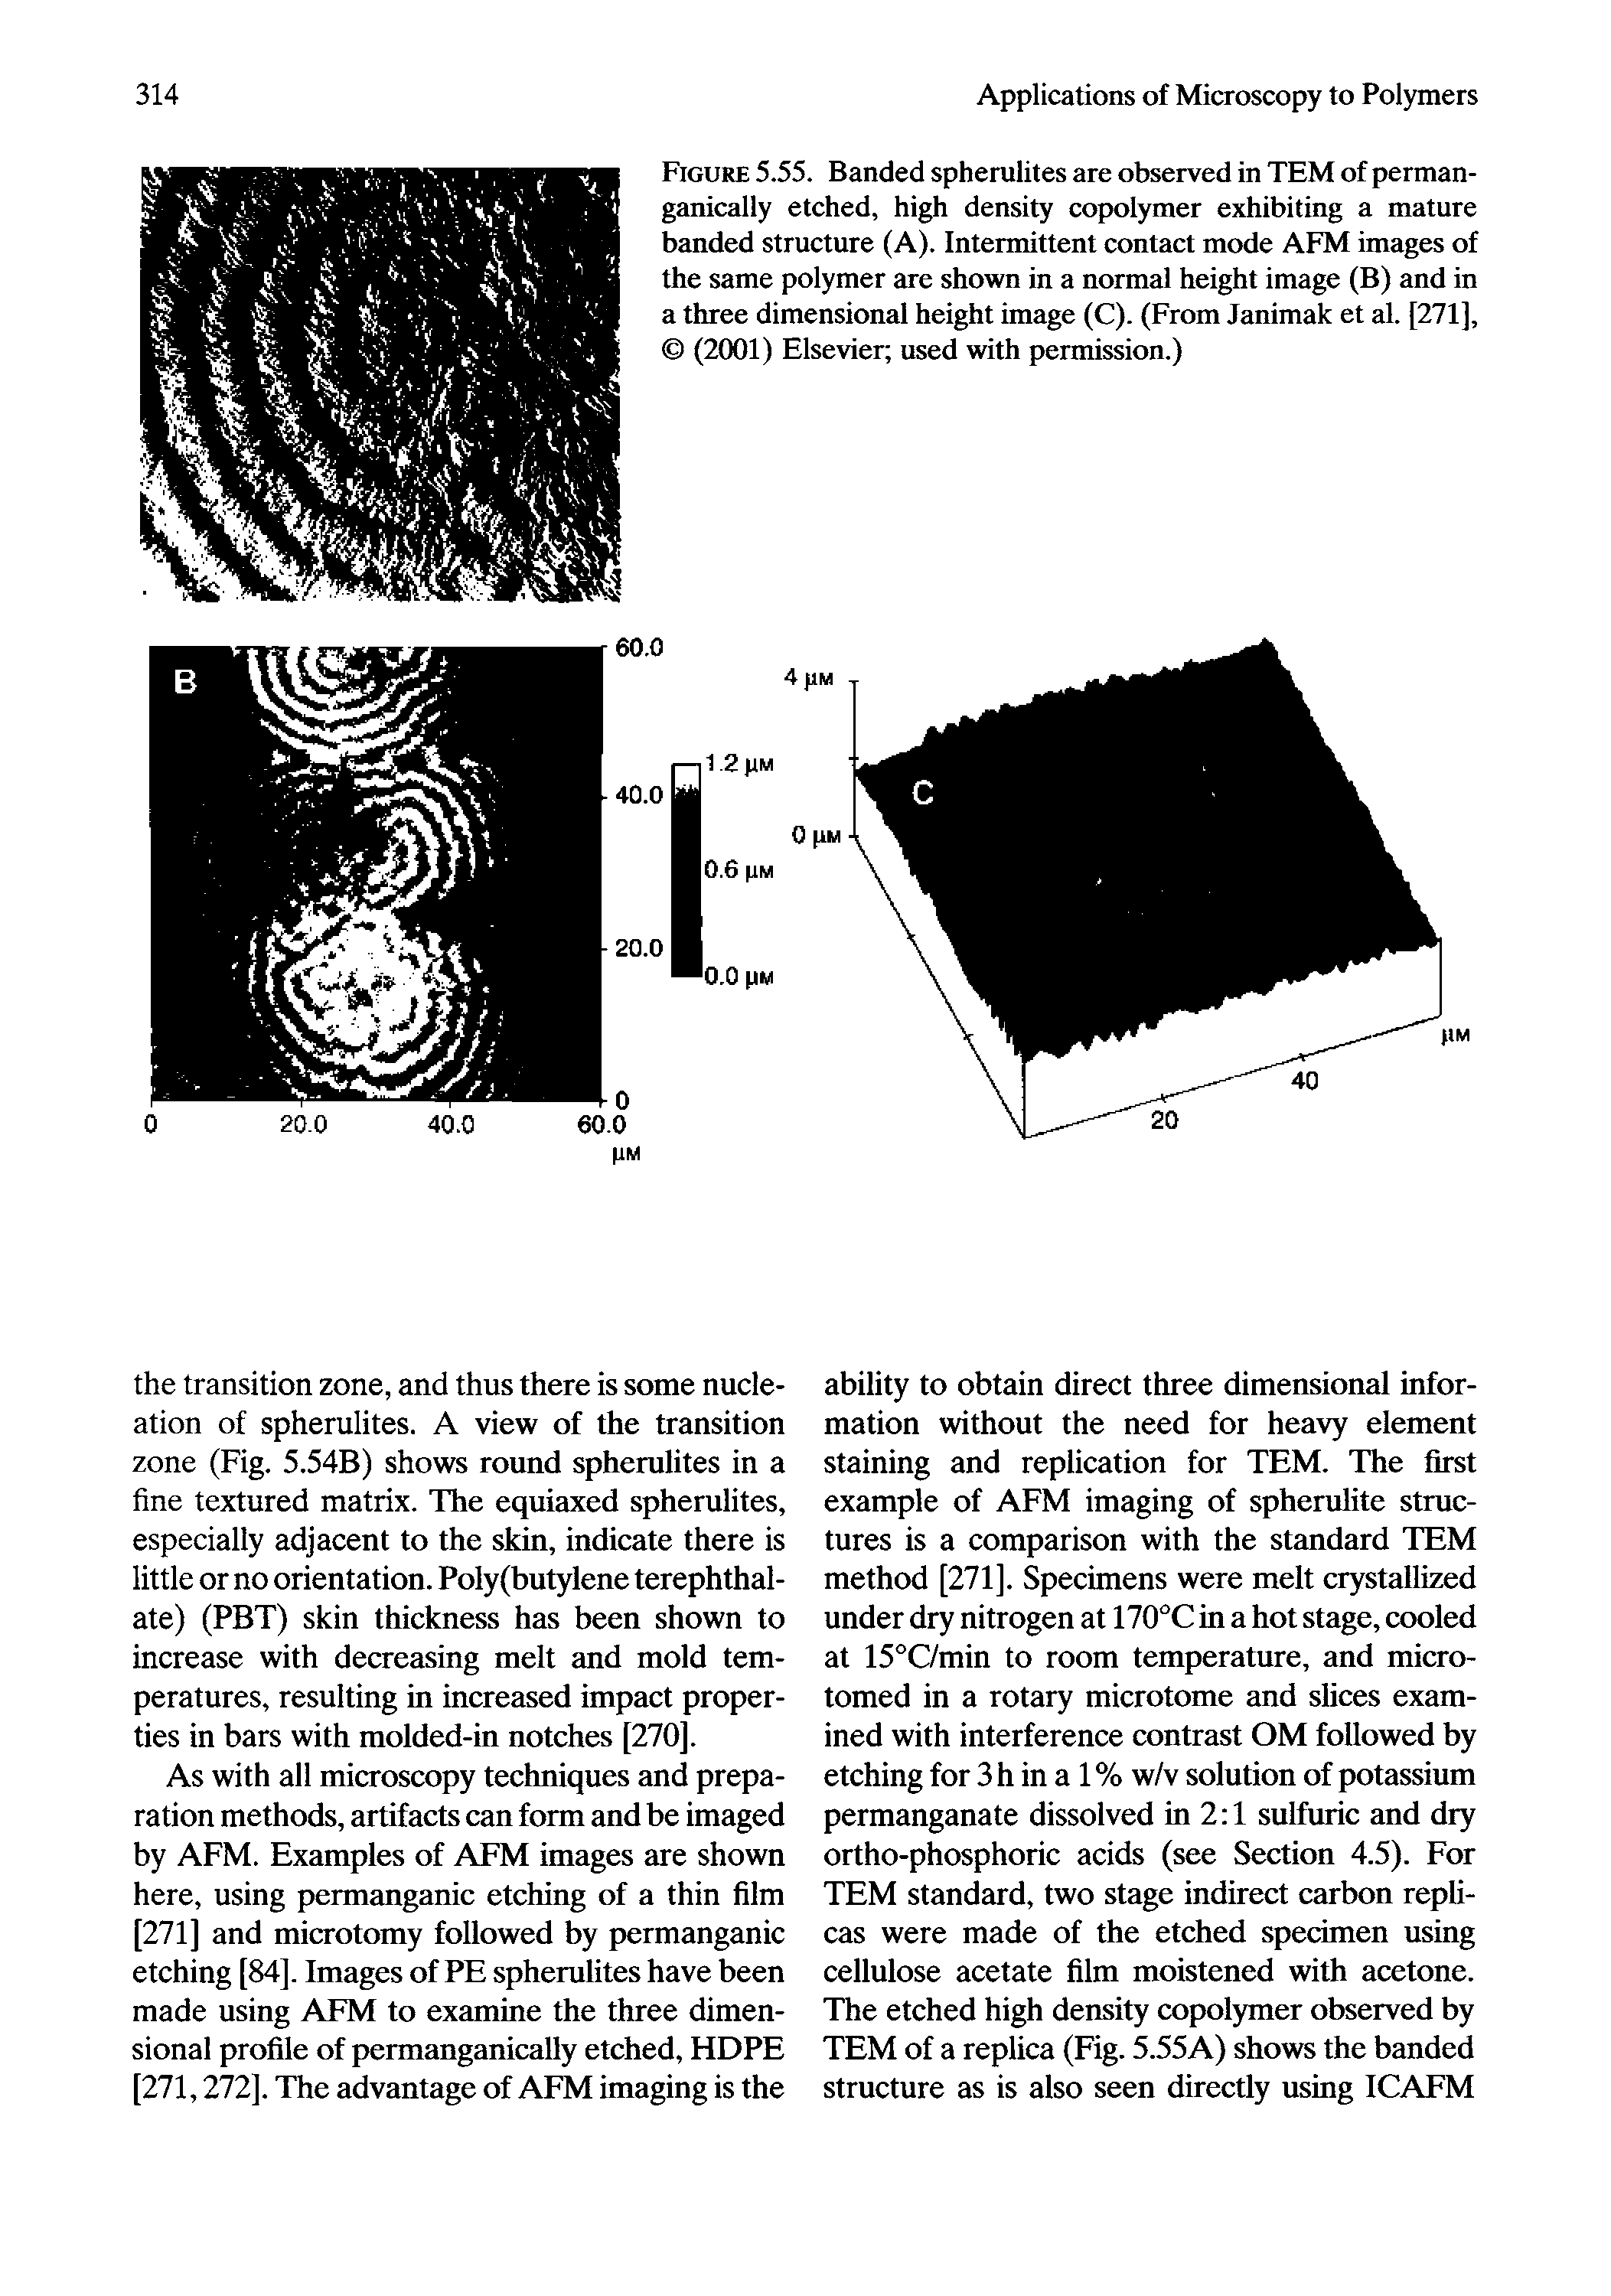 Figure 5.55. Banded spherulites are observed in TEM of perman-ganically etched, high density copolymer exhibiting a mature banded structure (A). Intermittent contact mode AFM images of the same polymer are shown in a normal height image (B) and in a three dimensional height image (C). (From Janimak et al. [271], (2001) Elsevier used with permission.)...